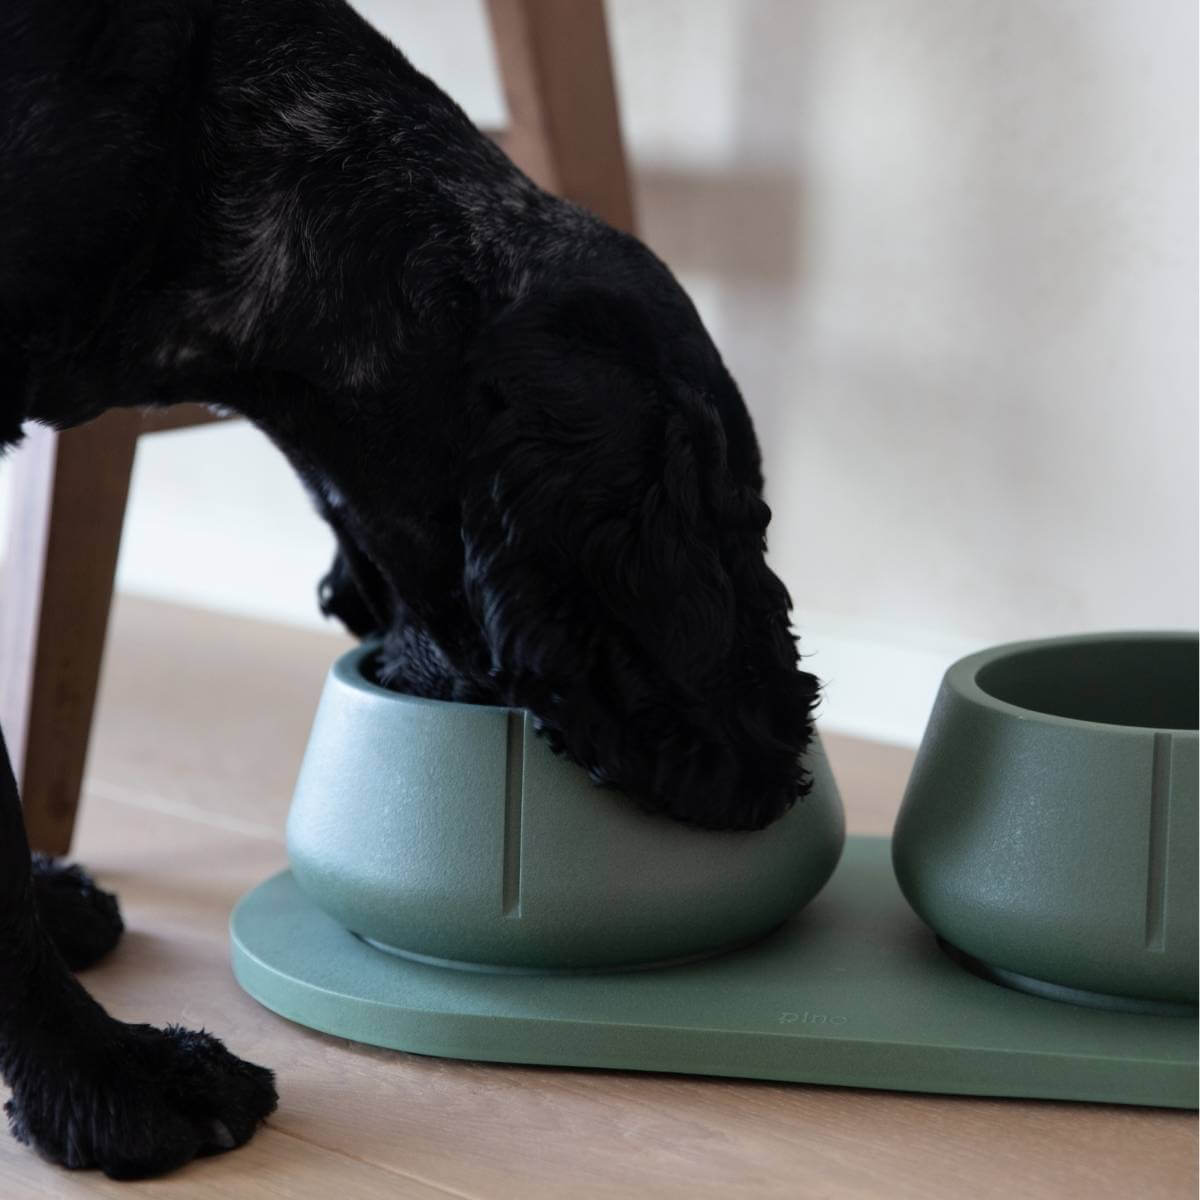 a dog with long ears eating out of a duck green long ears bowl